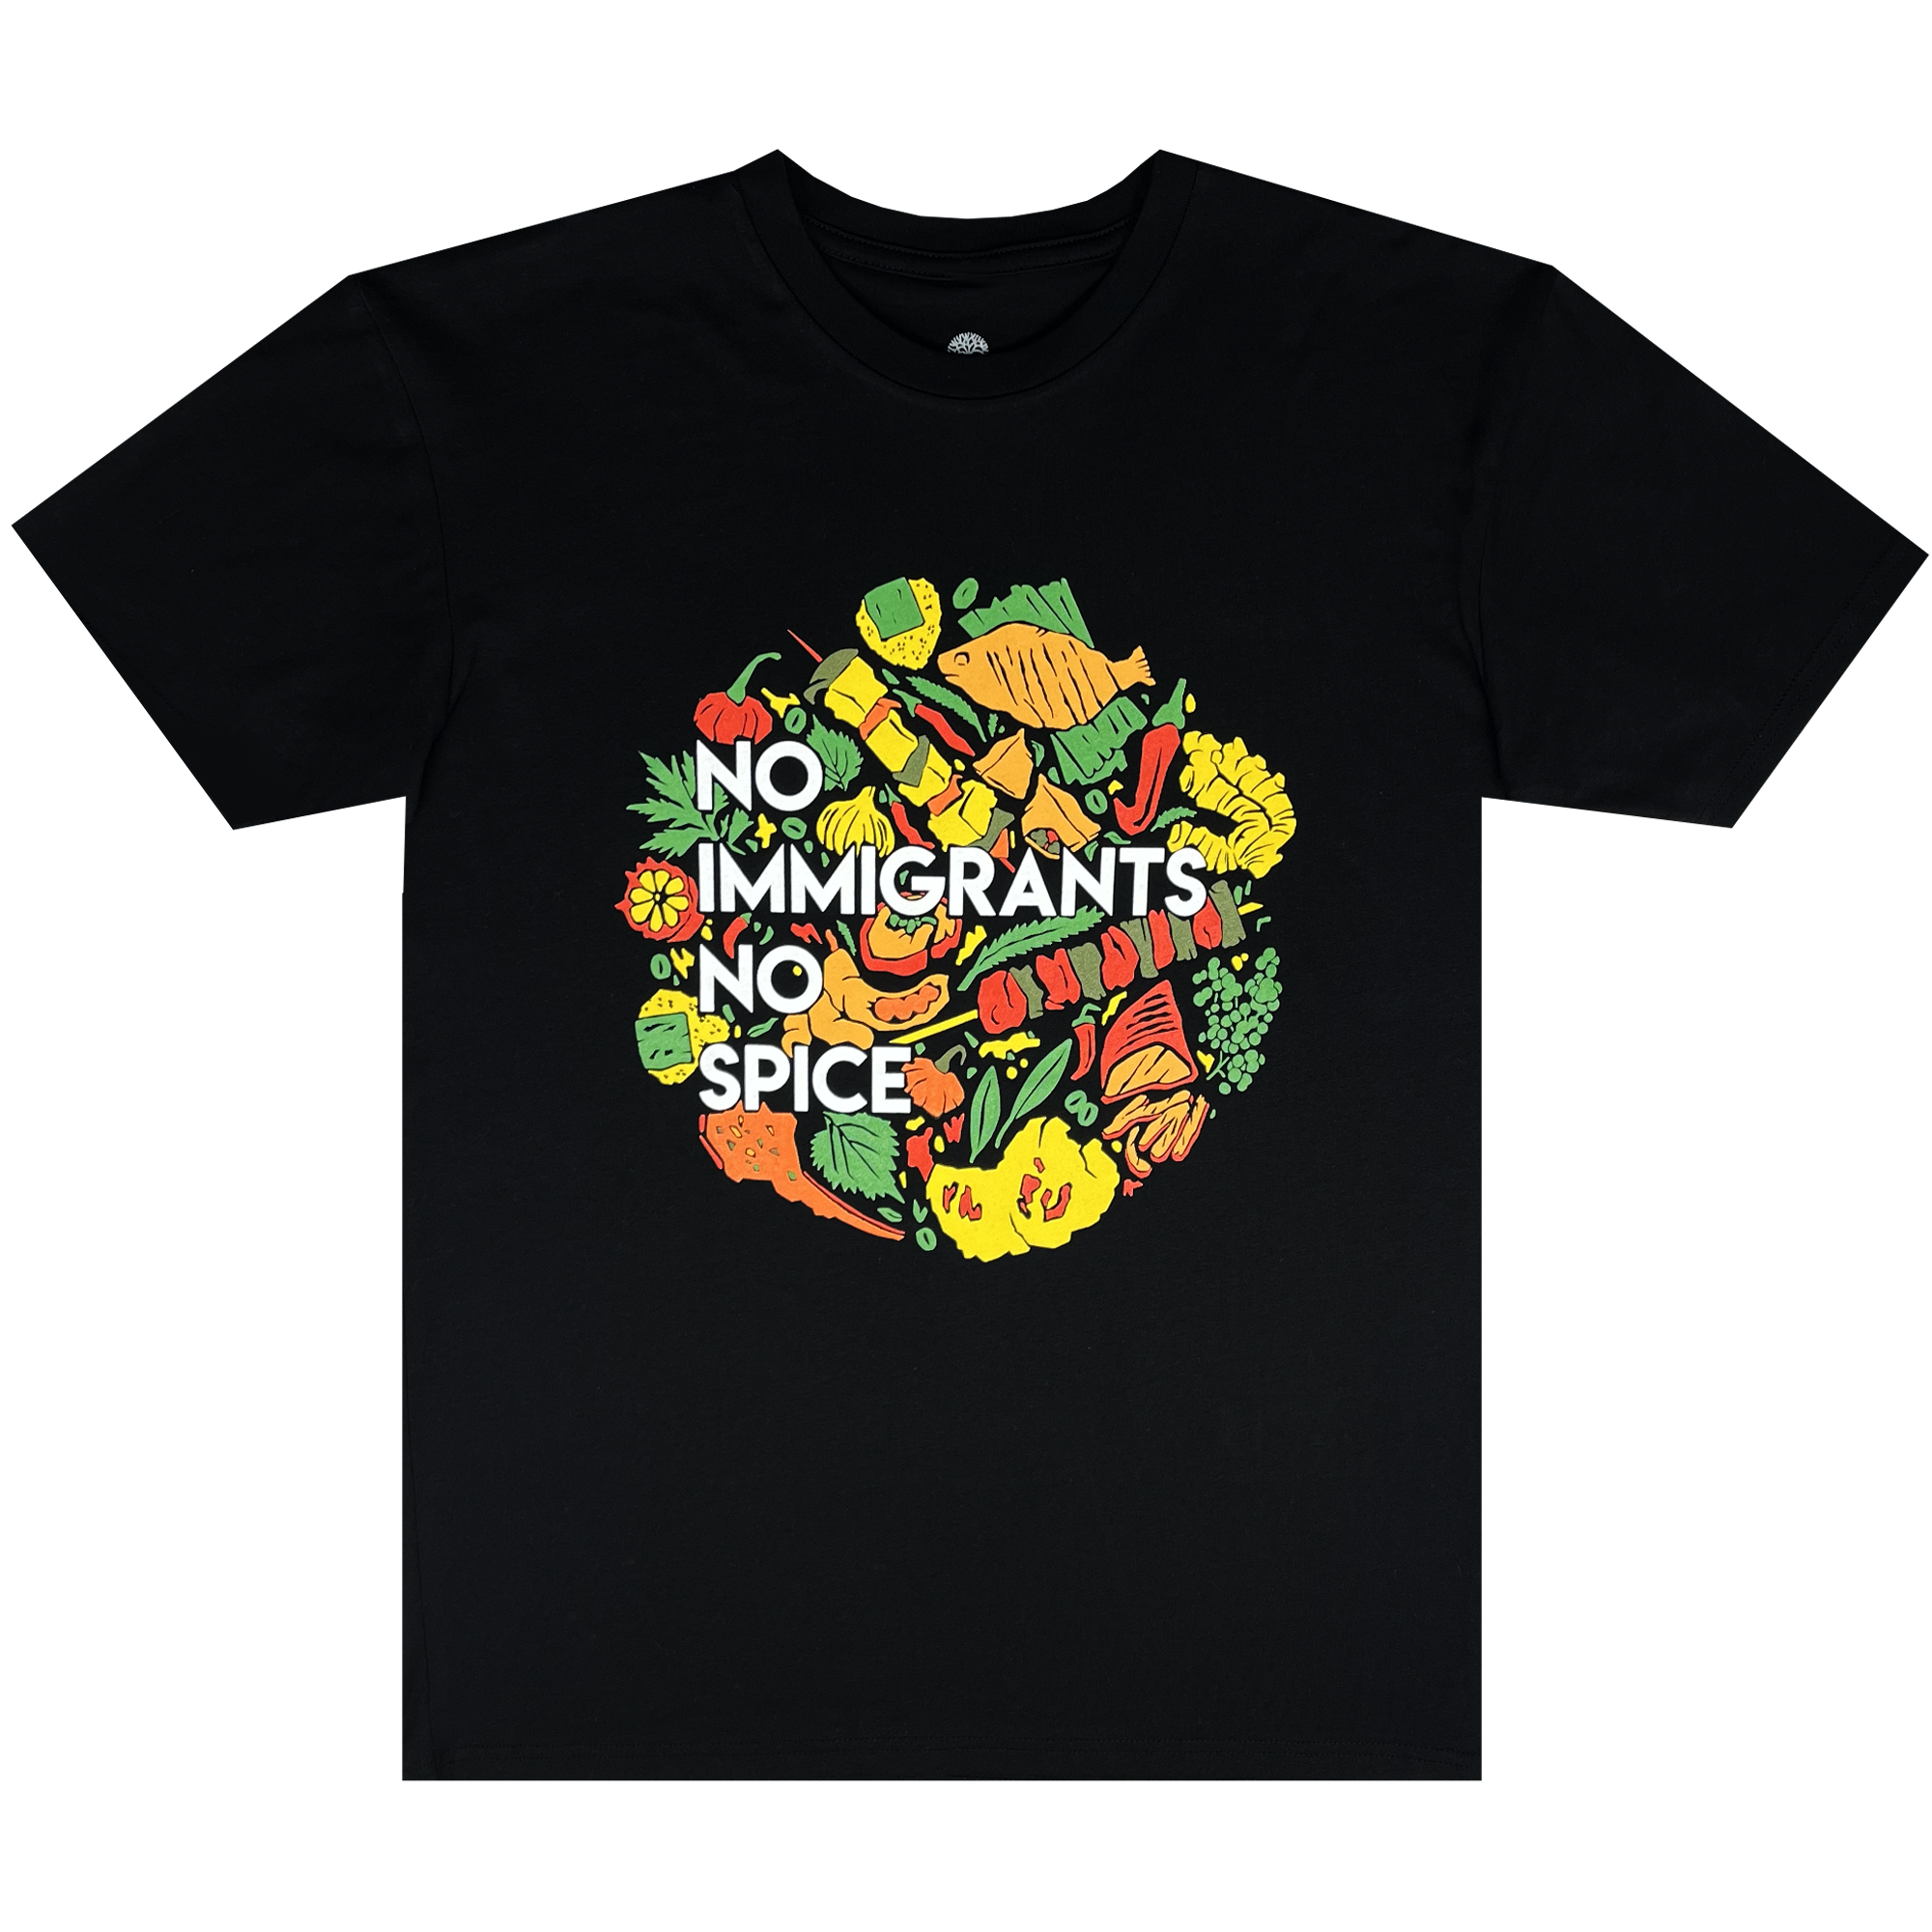 Women's black t-shirt with white NO IMMIGRANTS NO SPICE wordmark on full-color BBQ without borders graphic on the front chest.